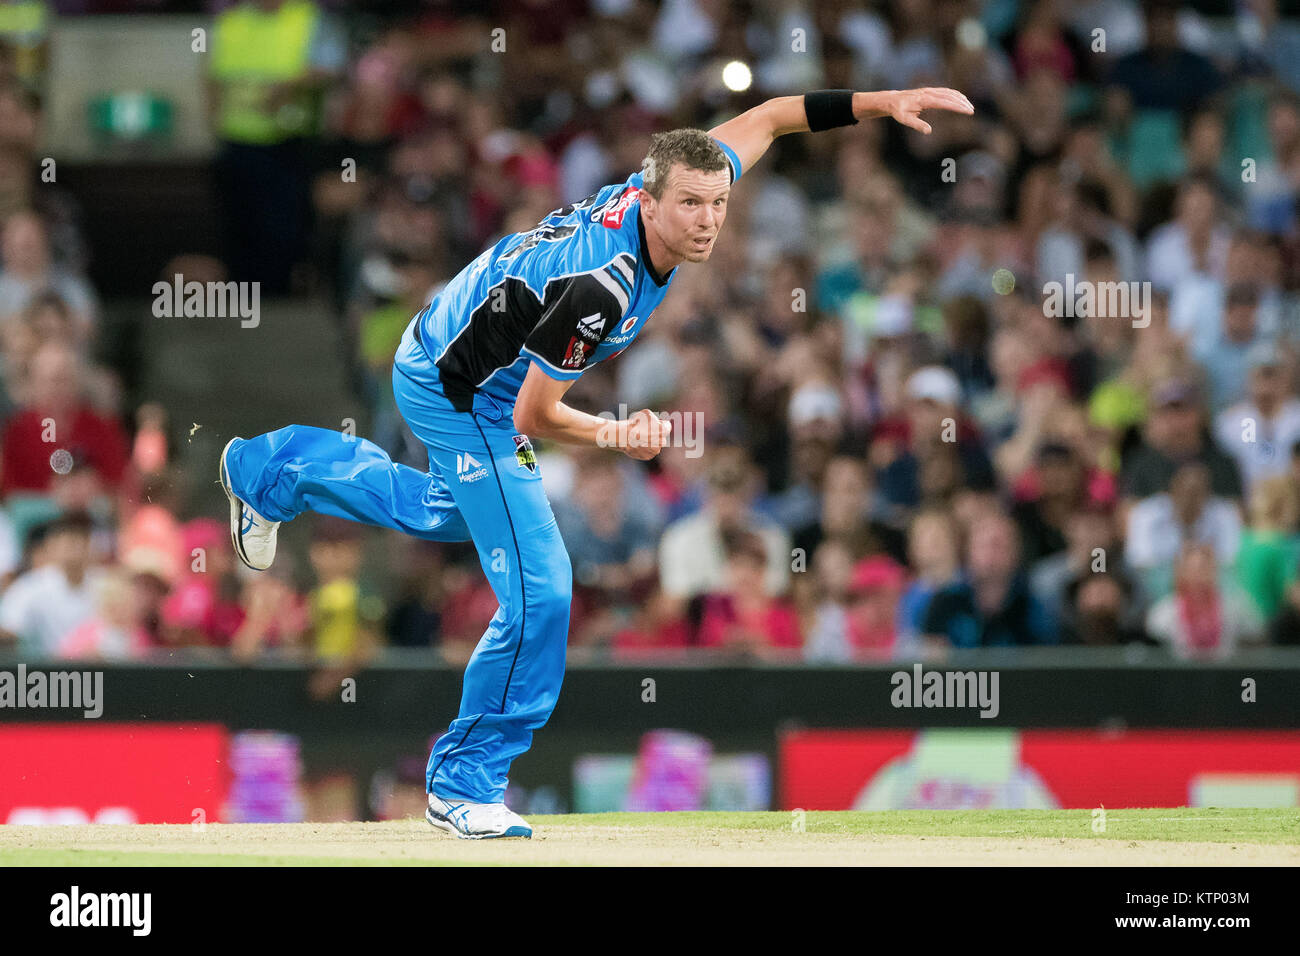 Sydney, Australia. 28th Dec, 2017.Adelaide Strikers player Peter Siddle bowls at the KFC Big Bash League Cricket game between Sydney Sixers v Adelaide Strikers at The SCG in Sydney. Credit: Steven Markham/Alamy Live News Stock Photo